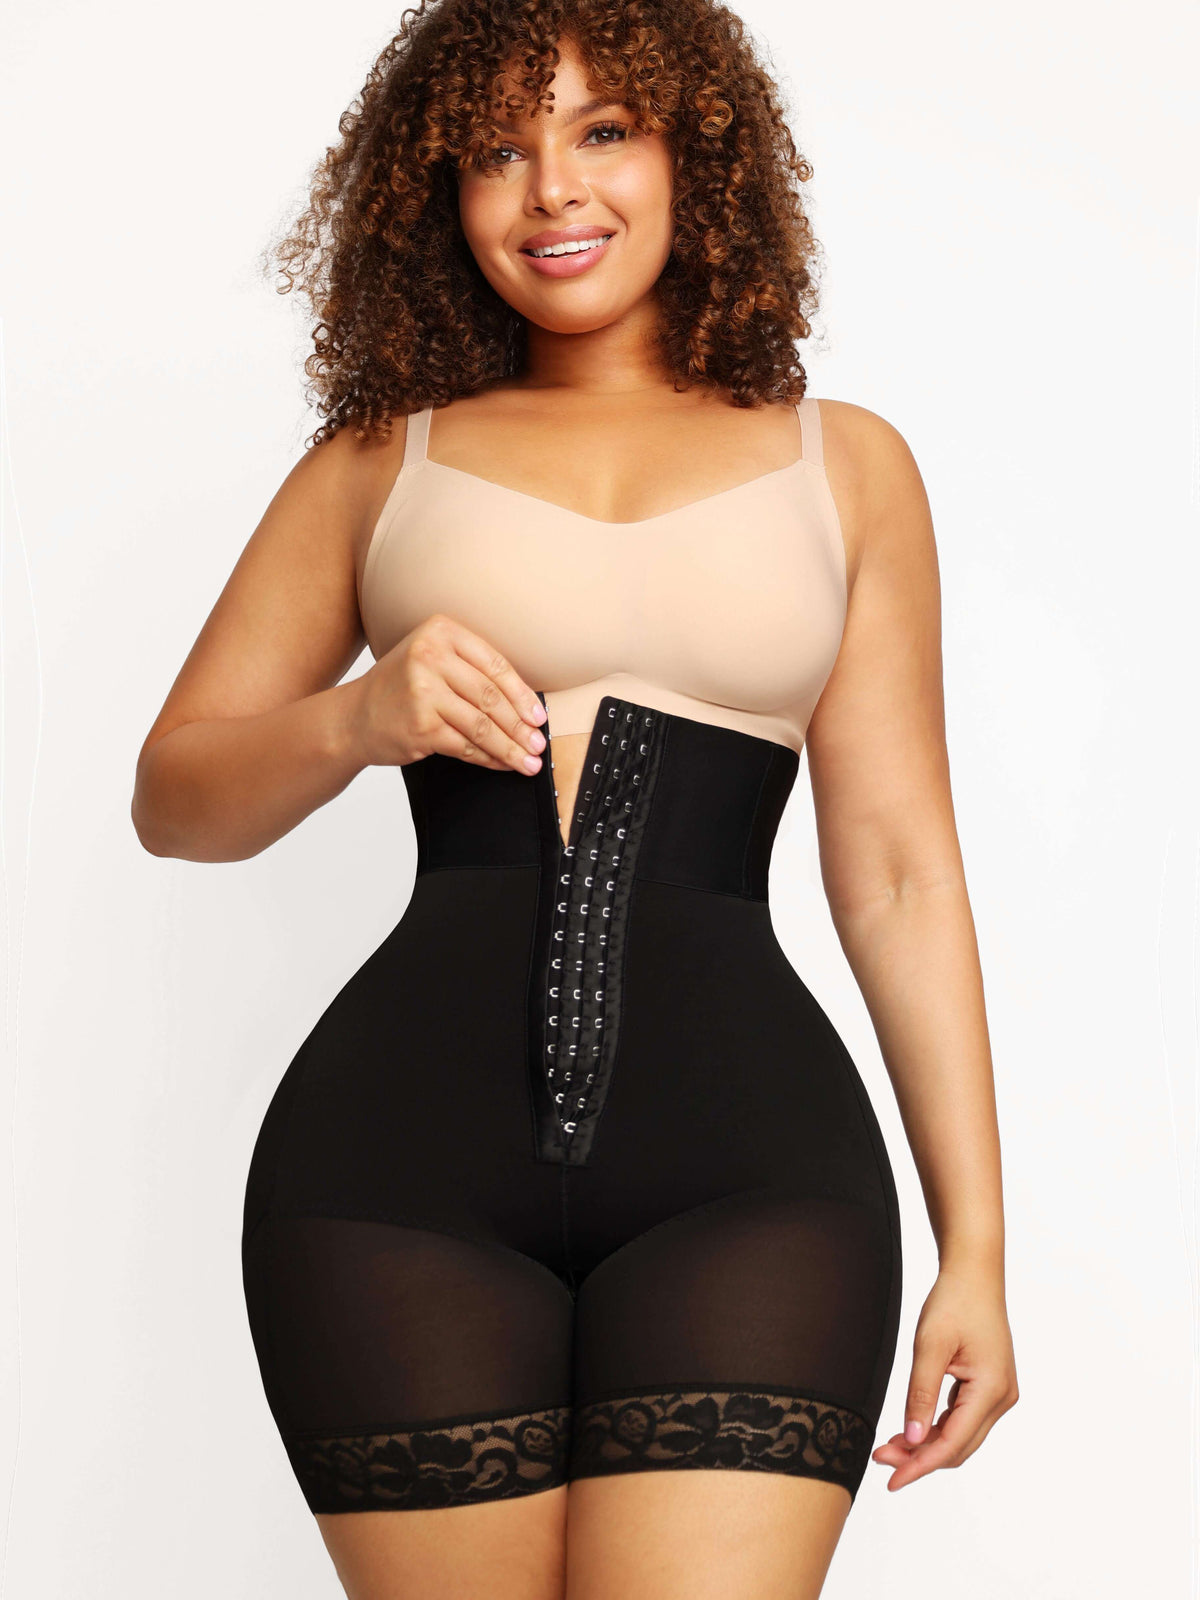 Wholesale Waist Trainers & Shapewear Supplier – Check Out What Waistdear Has to Offer!